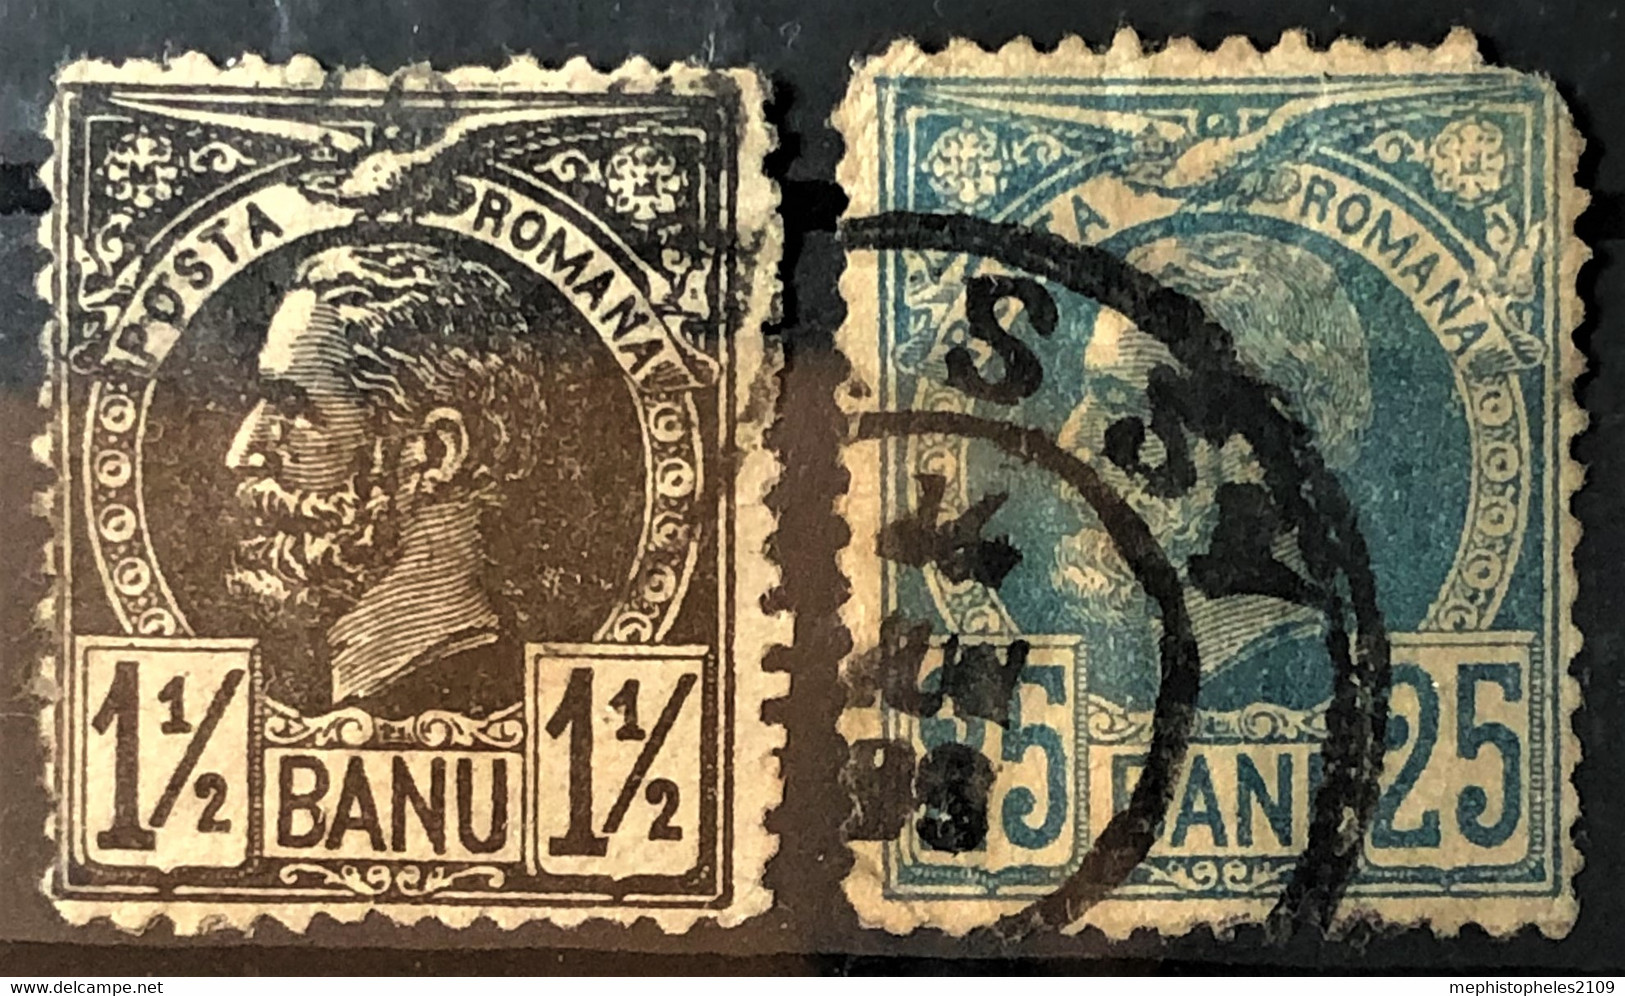 ROMANIA 1885 - Canceled - Sc# 75, 79 - Used Stamps